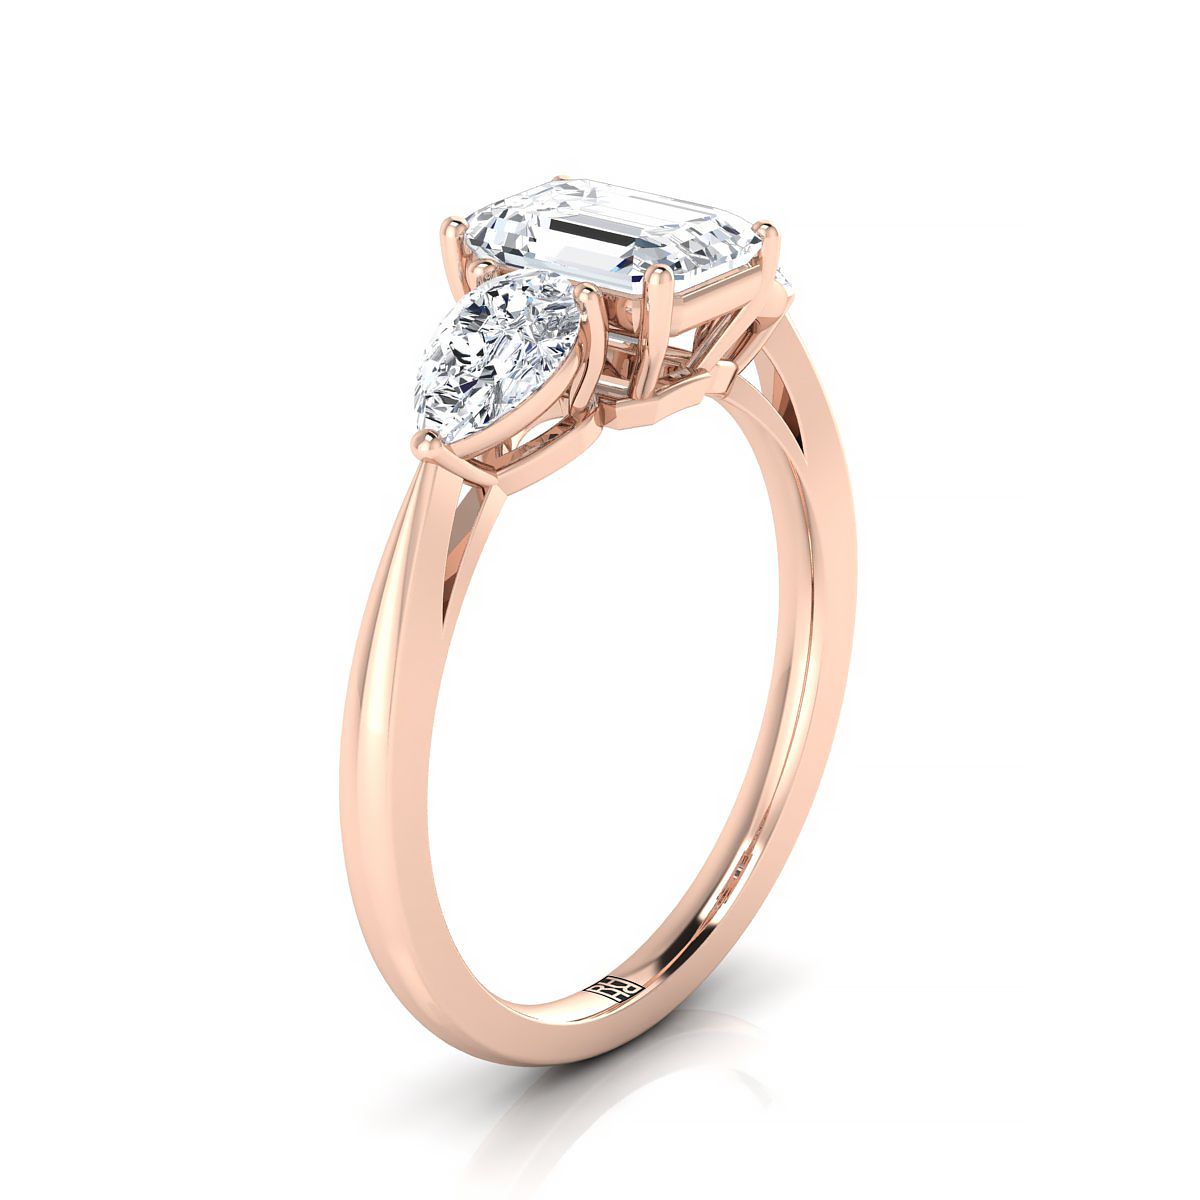 14K Rose Gold Emerald Cut Diamond Perfectly Matched Pear Shaped Three Diamond Engagement Ring -7/8ctw